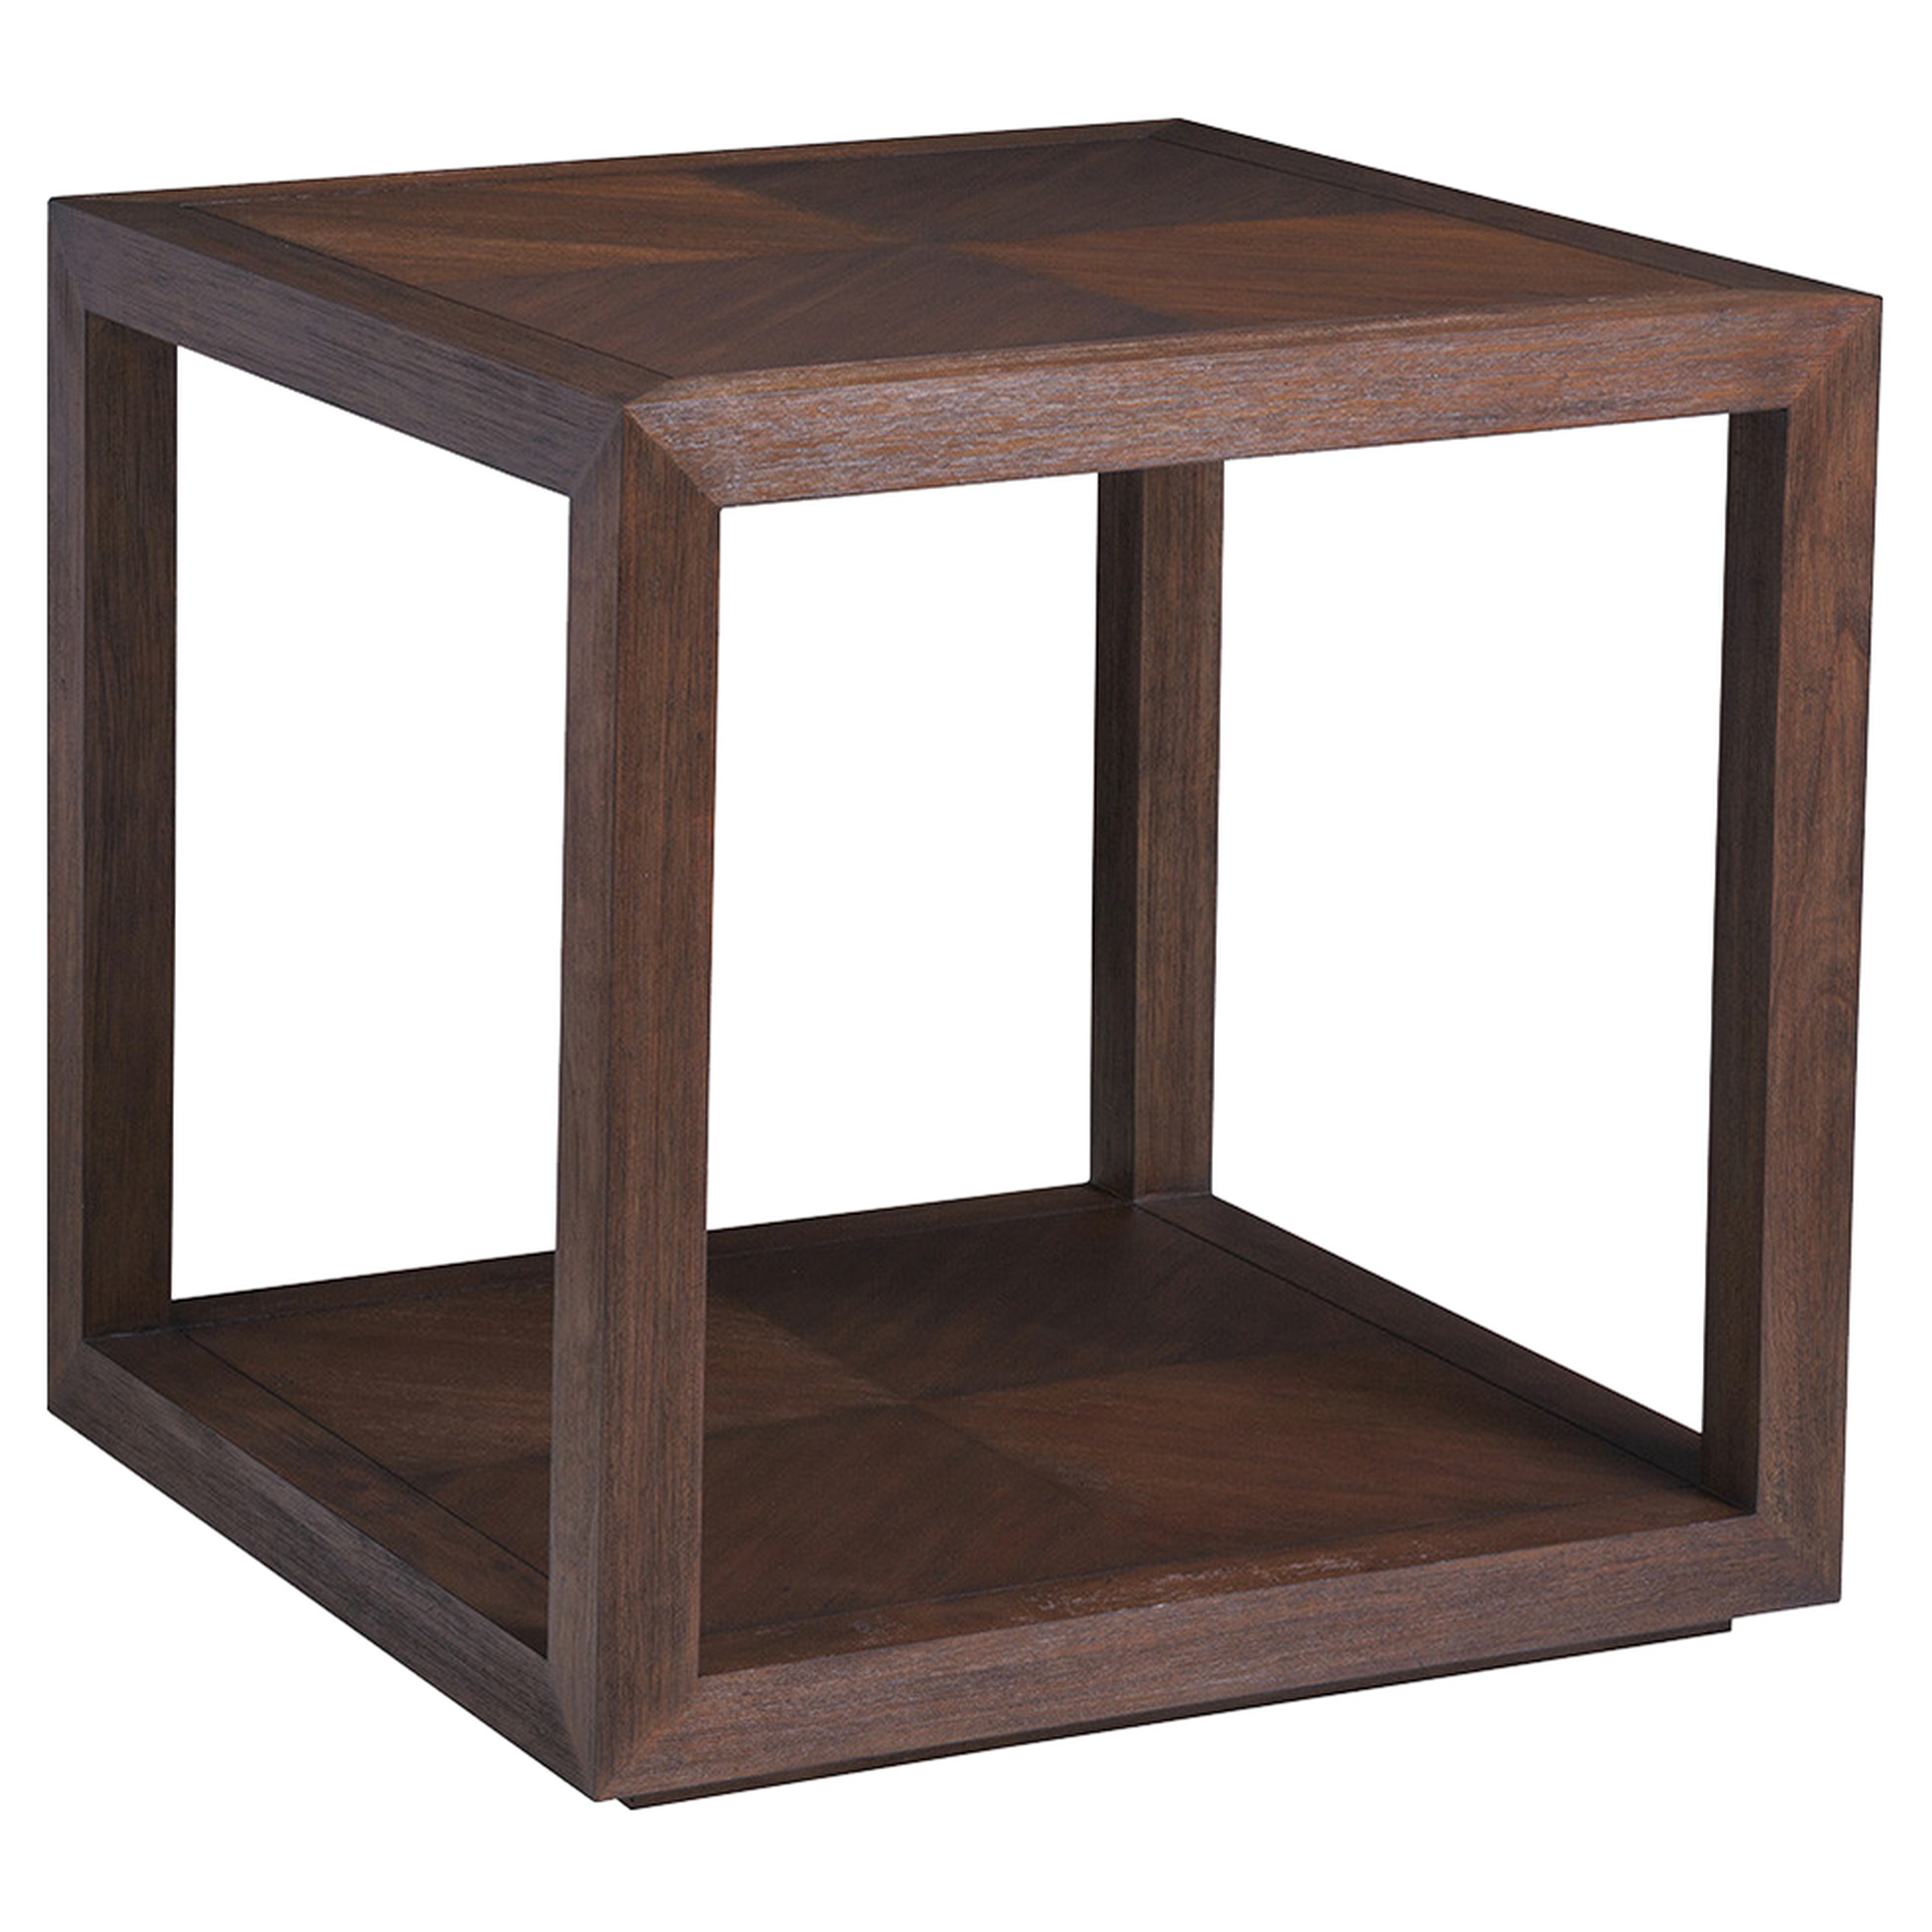 Artistica Credence Modern Wire Brushed Brown Wood Square Side End Table - Kathy Kuo Home